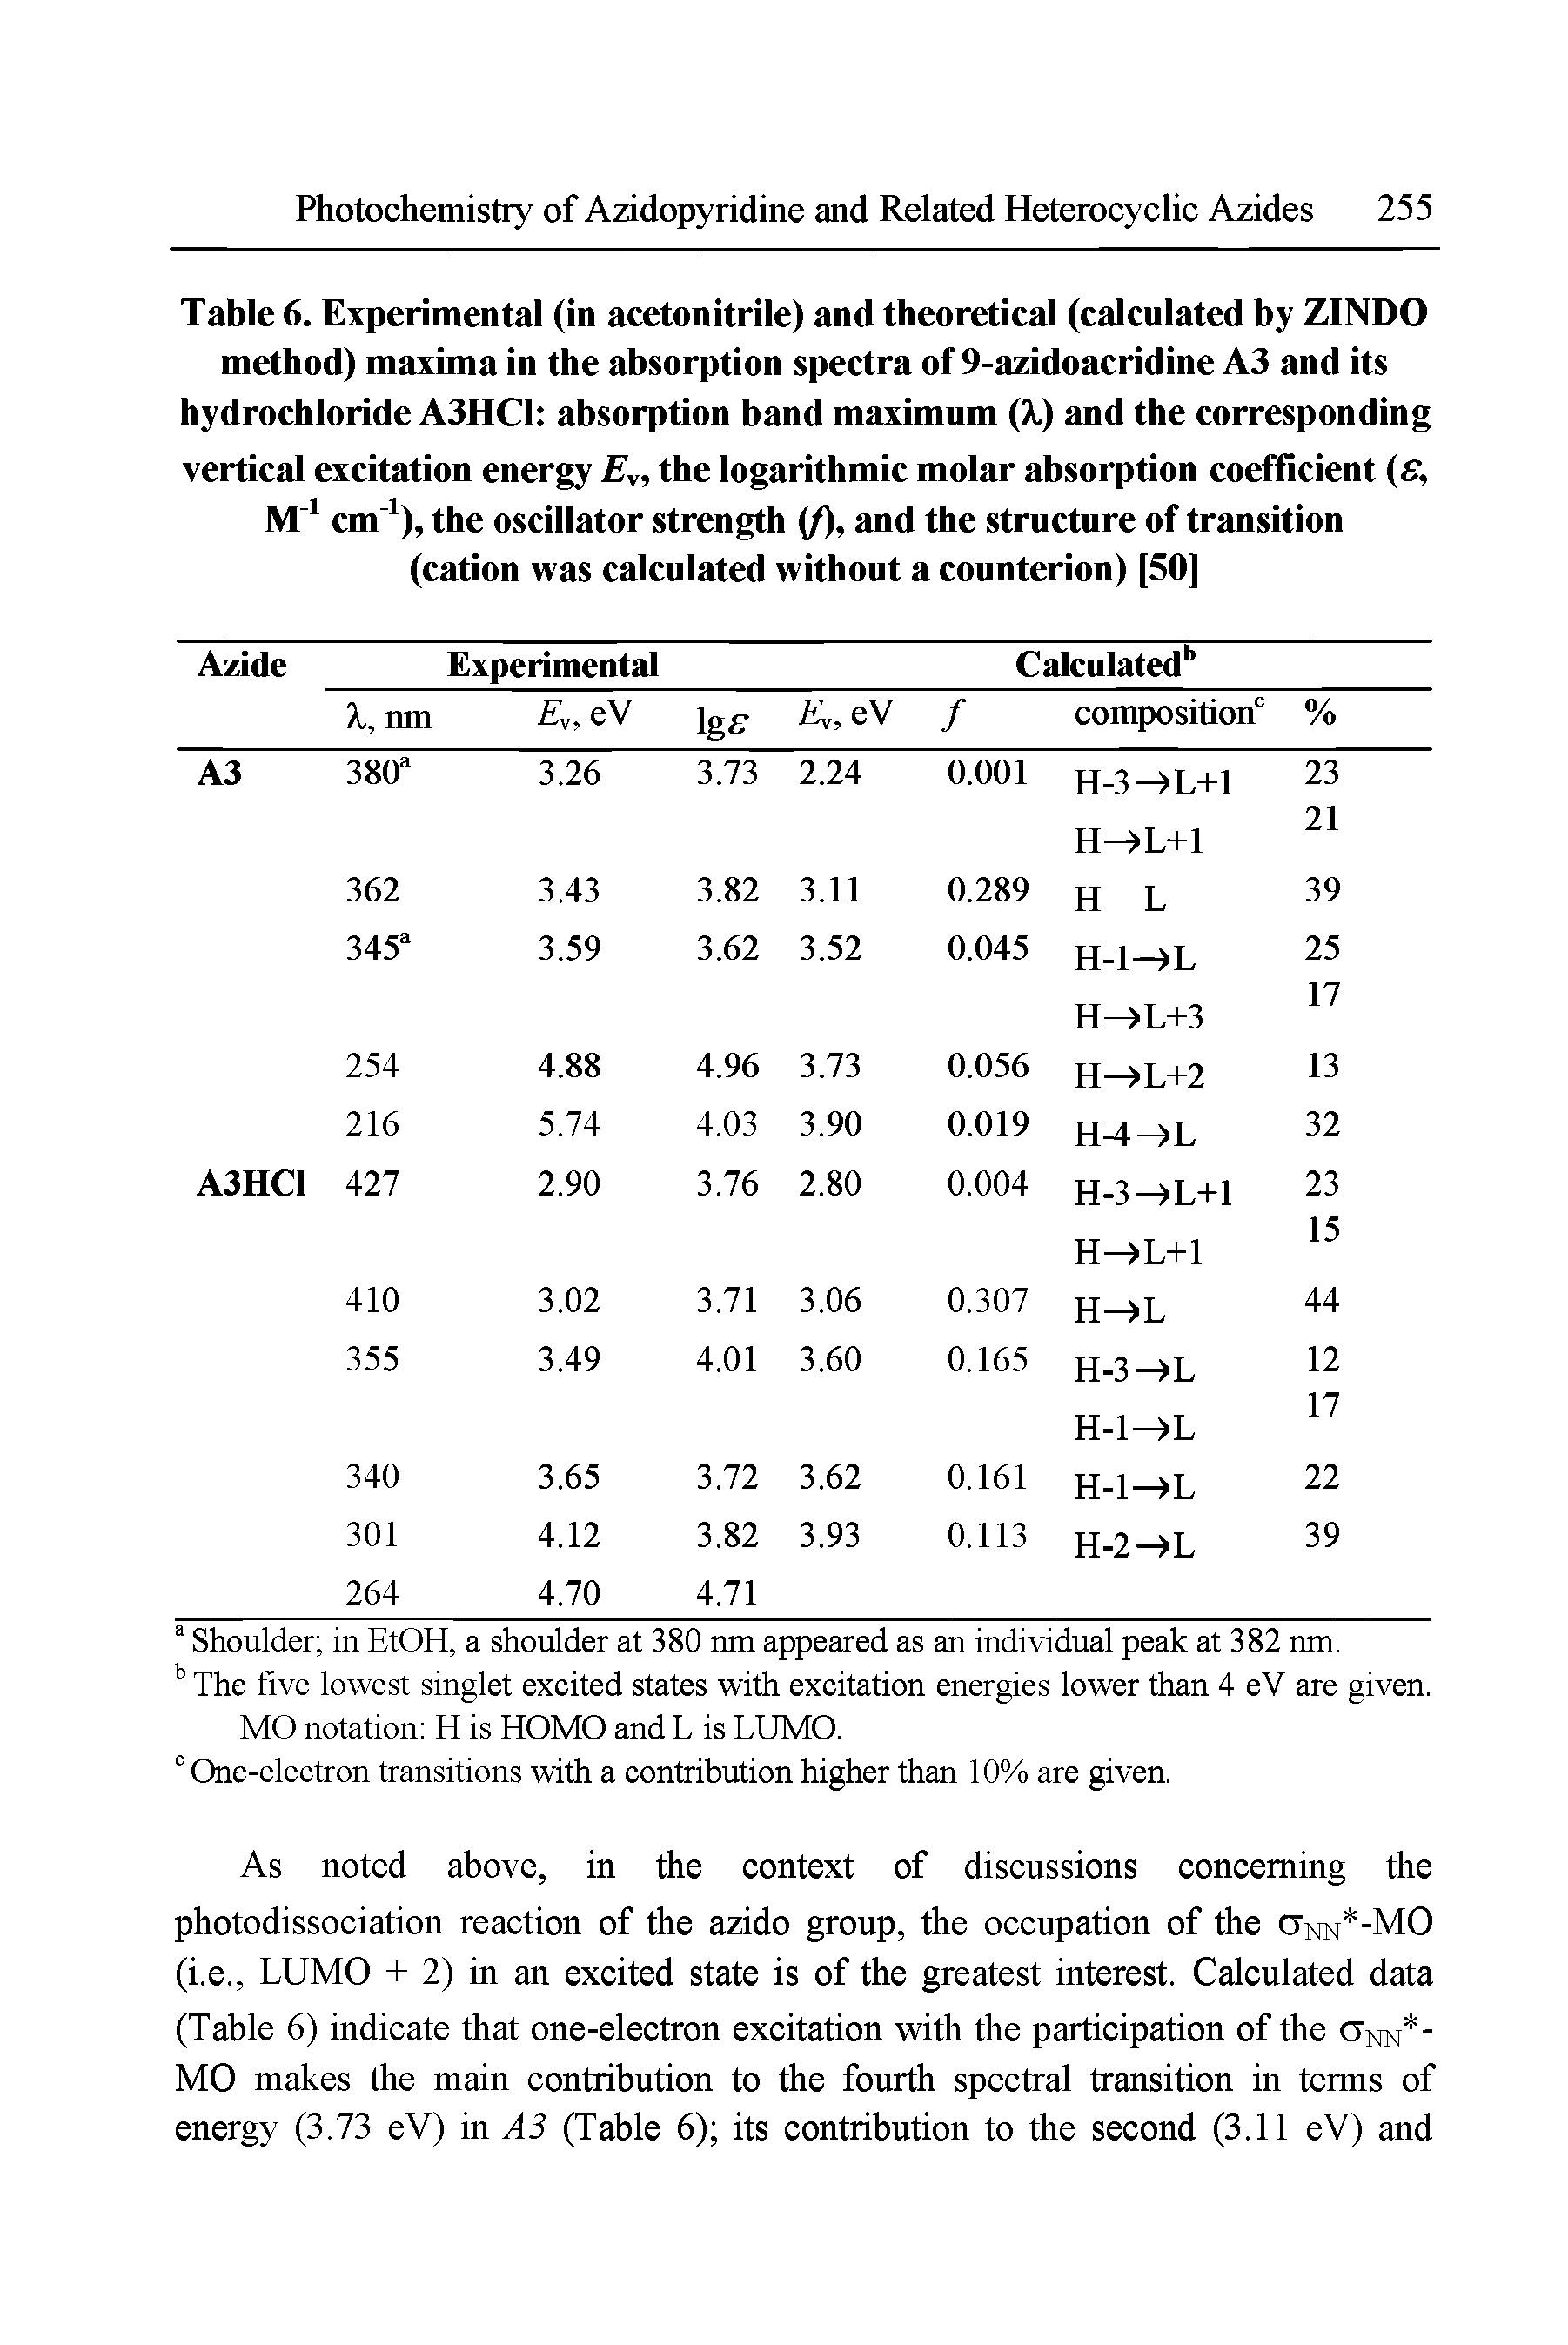 Table 6. Experimental (in acetonitrile) and theoretical (calculated by ZINDO method) maxima in the absorption spectra of 9-azidoacridine A3 and its hydrochloride A3HC1 absorption band maximum (X) and the corresponding vertical excitation energy E, the logarithmic molar absorption coefficient s, cm ), the oscillator strength (/), and the structure of transition (cation was calculated without a counterion) [50] ...